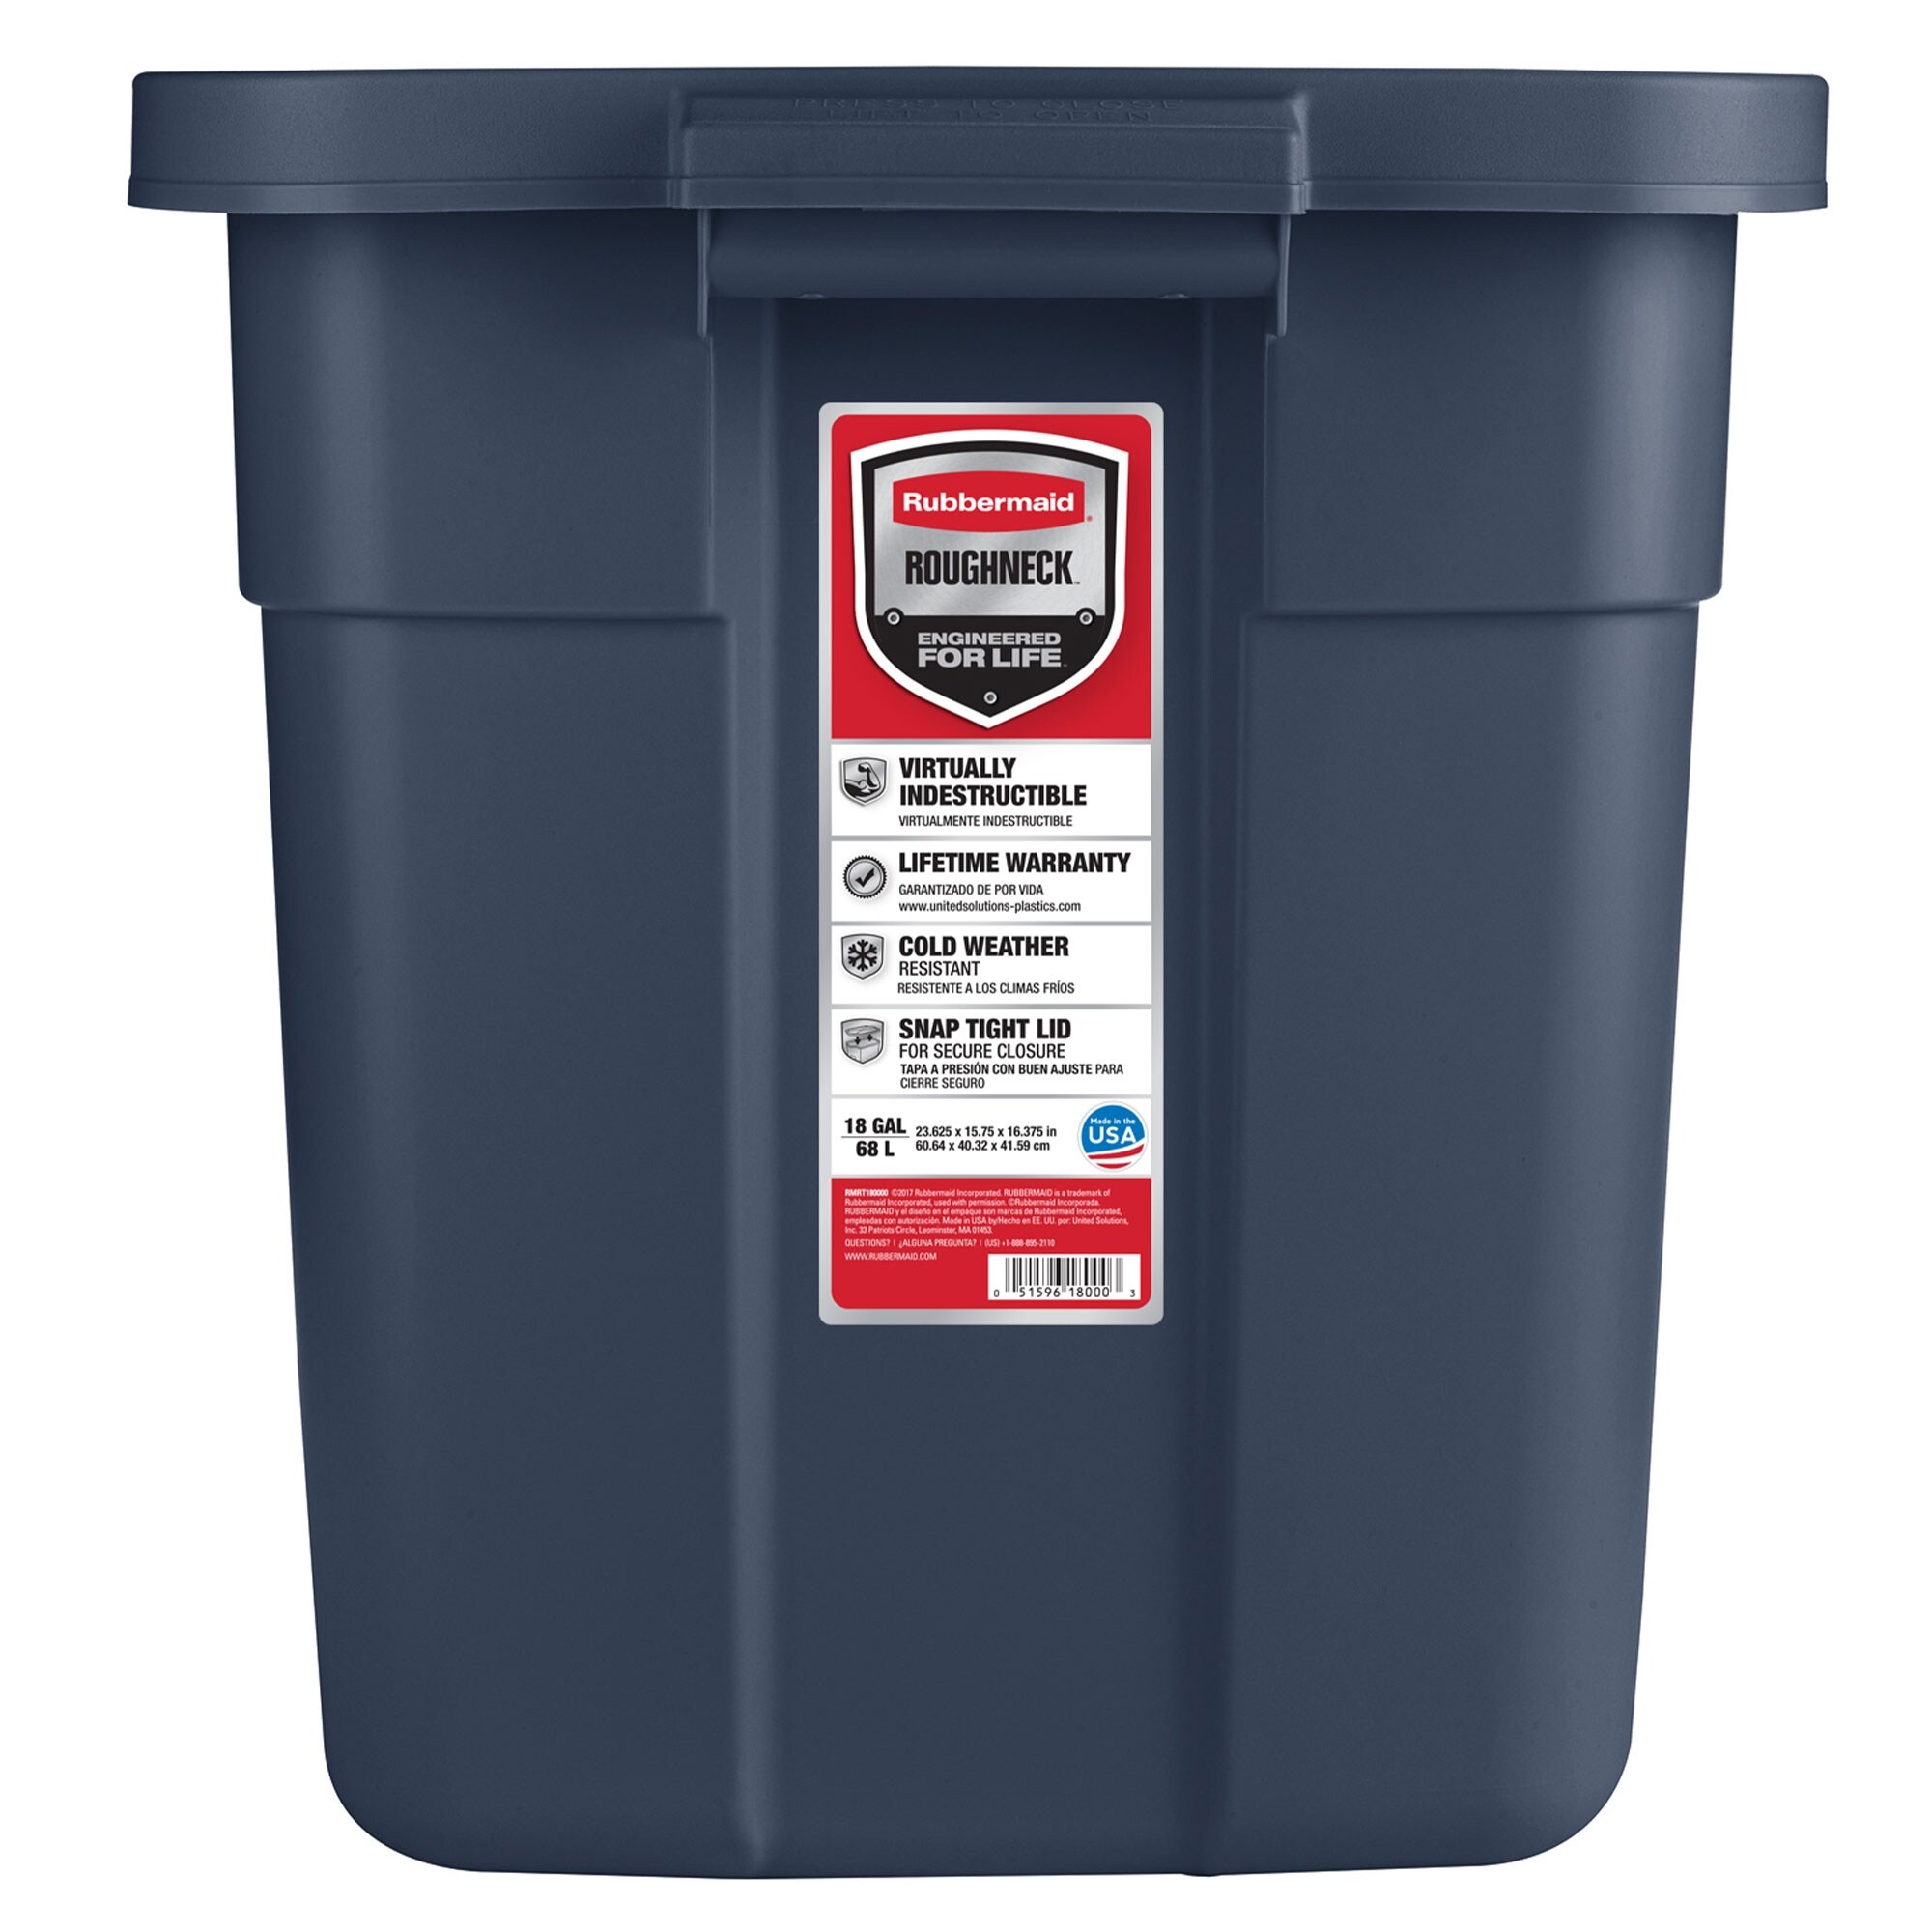 https://ak1.ostkcdn.com/images/products/is/images/direct/9d5d38c6275ec895a9e502958359556653e377a4/Rubbermaid-18-Gallon-Stackable-Storage-Container%2C-Dark-Indigo-Metallic-%286-Pack%29.jpg